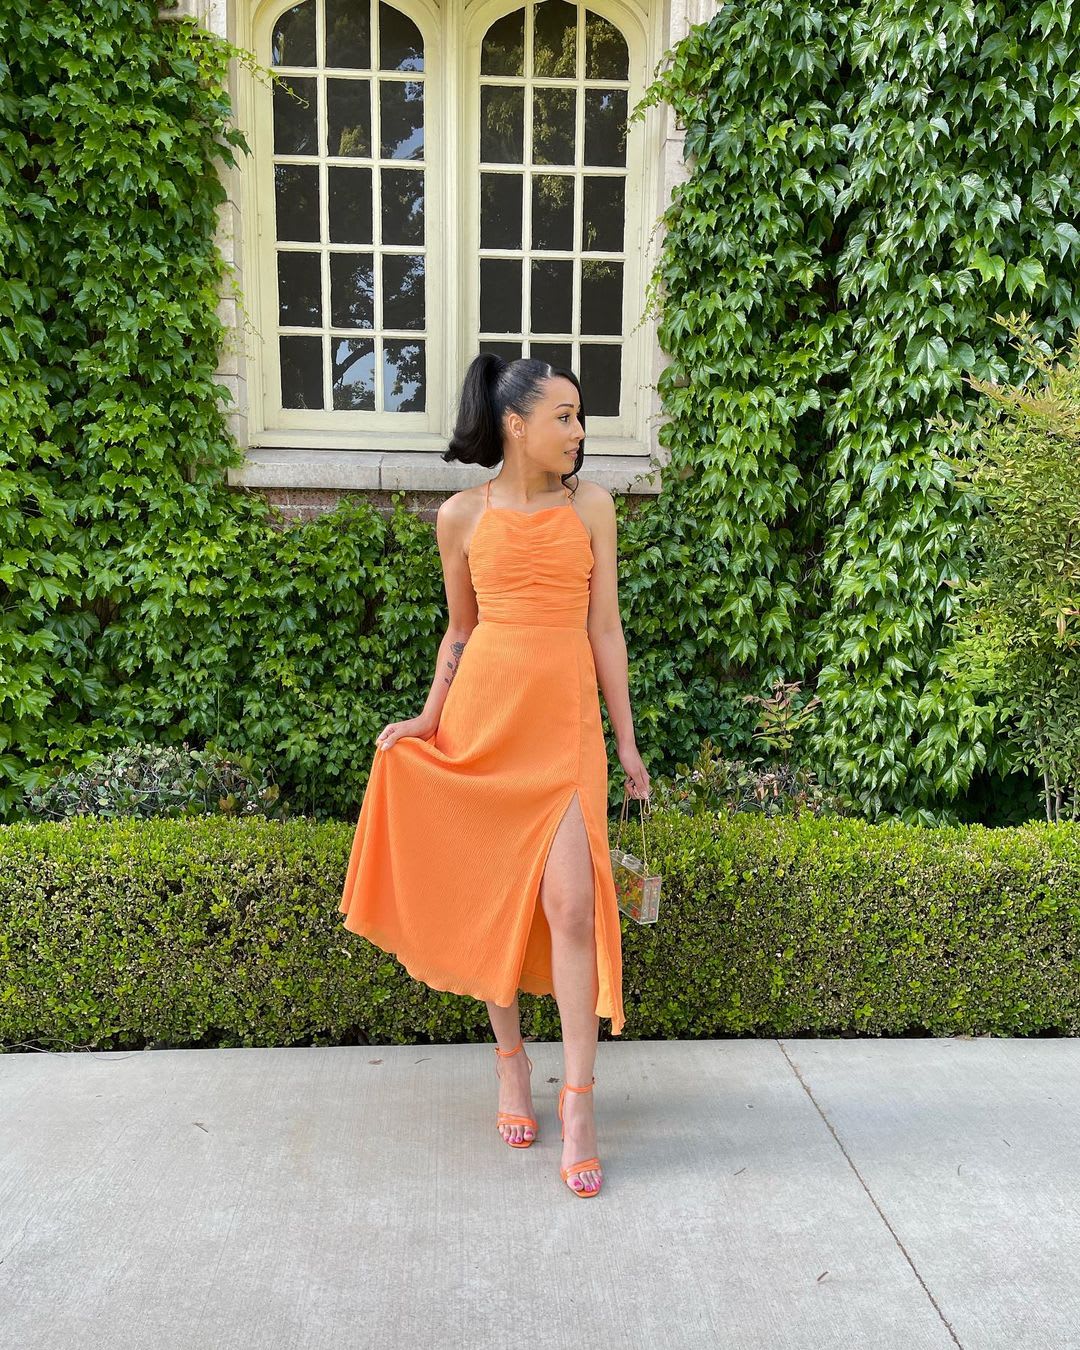 Beach Dresses For Wedding Guests: 13 Stylish Looks To Copy - Lulus.com ...